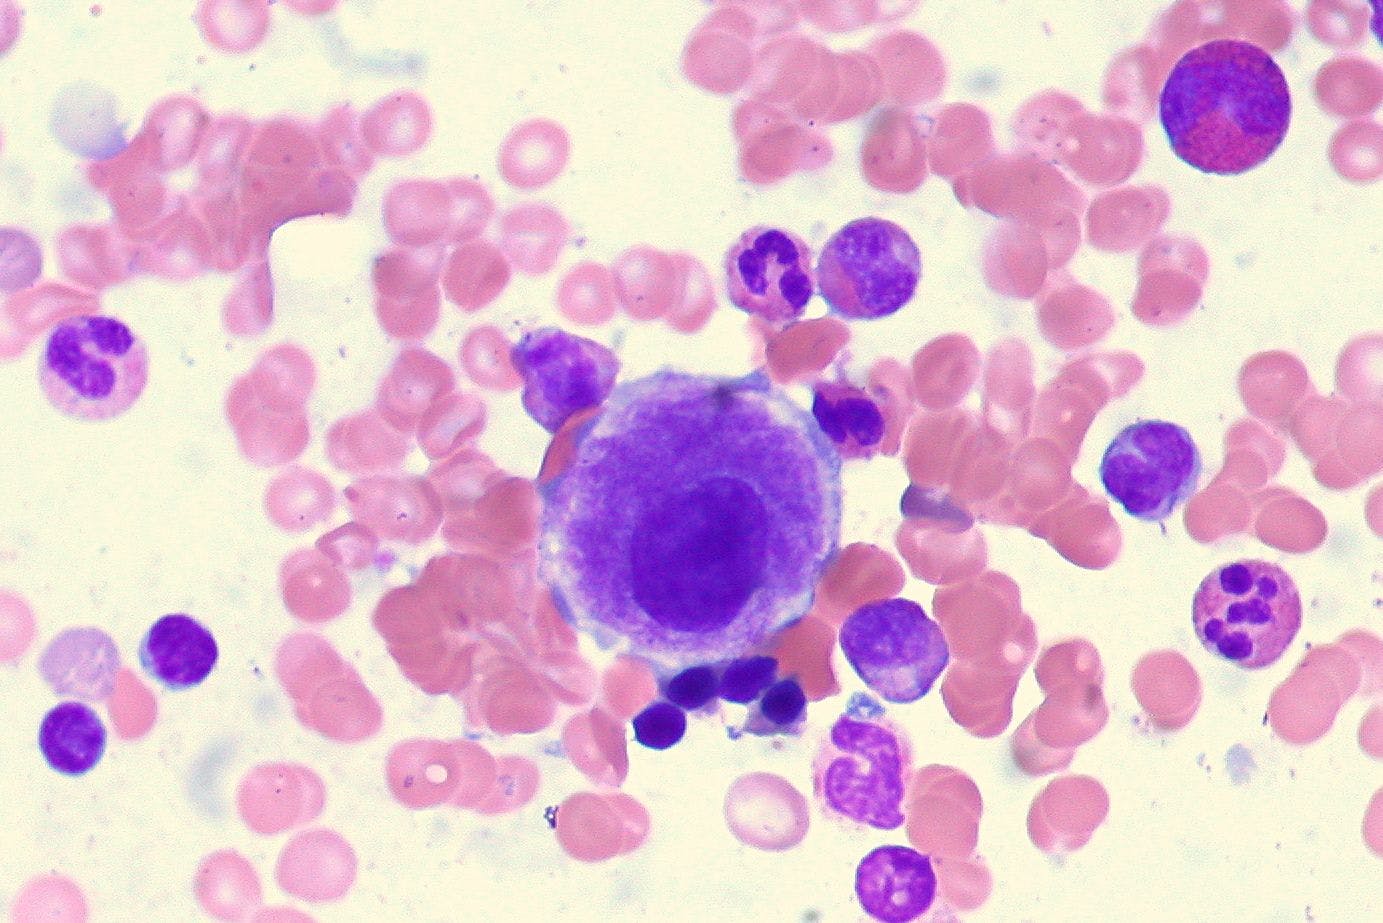 A recent analysis of patients with several different hematologic malignancies finds that vulnerable patients report having worse health-related quality of life across all measures.